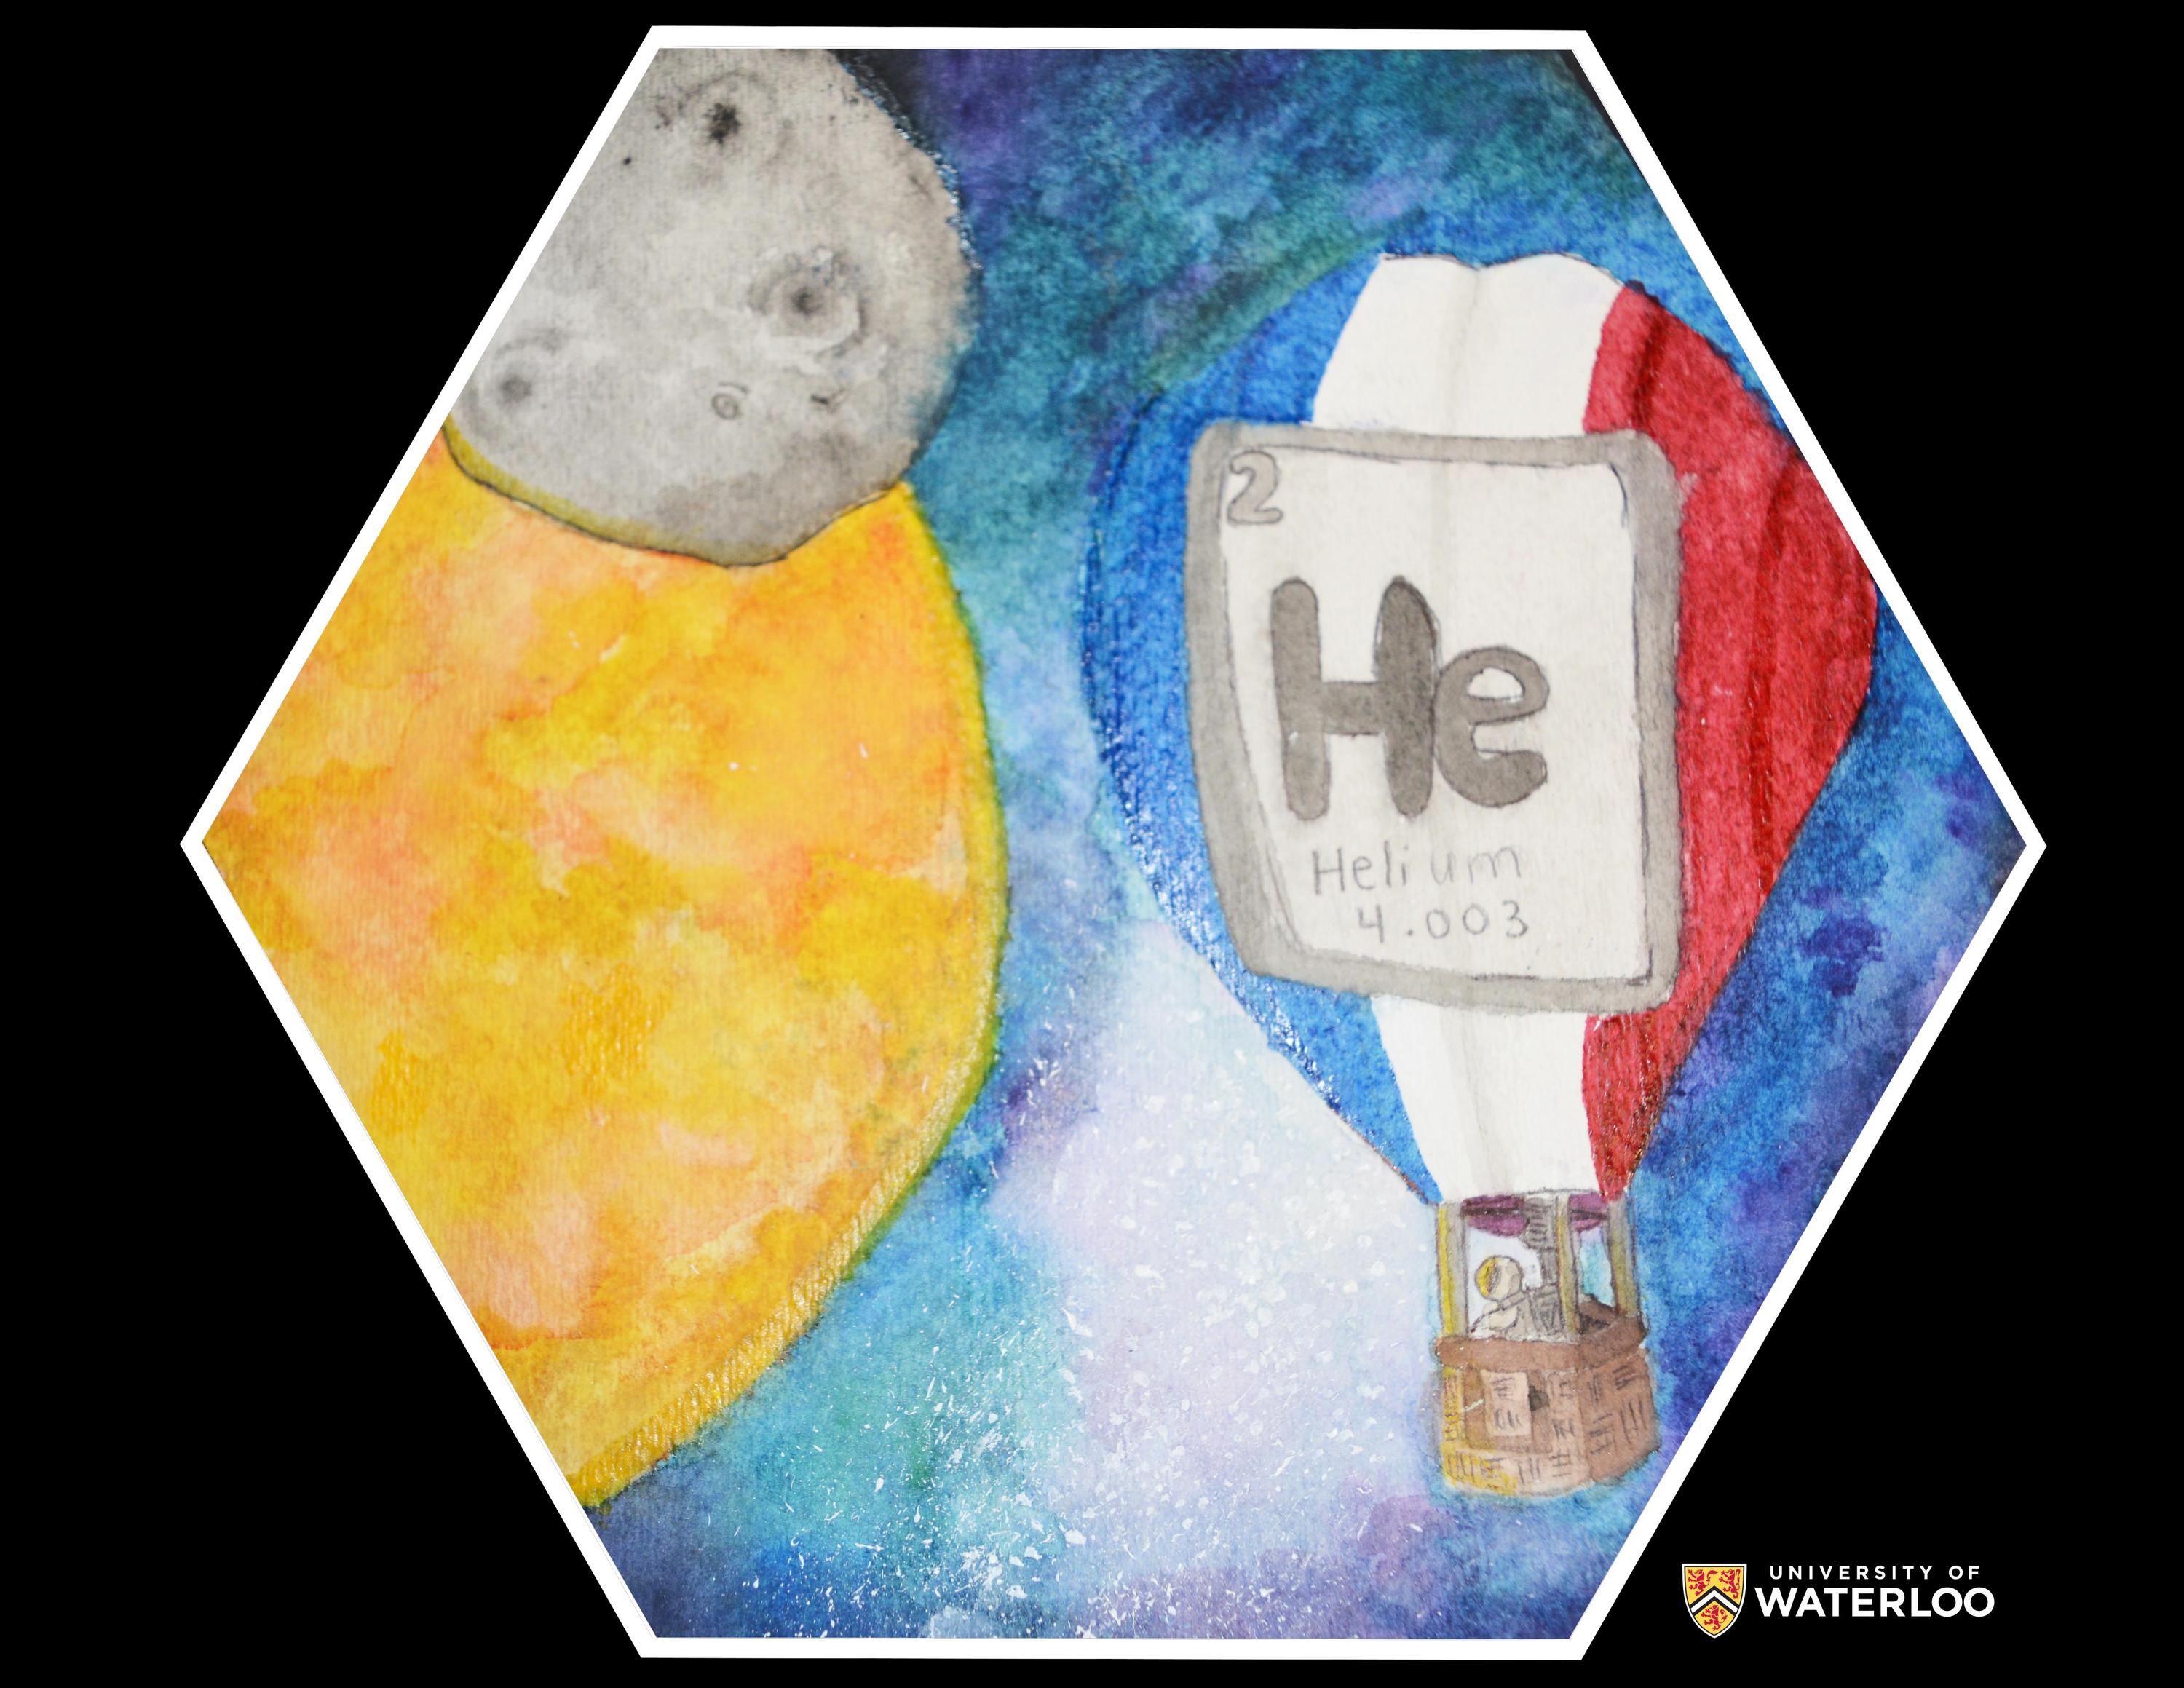 Watercolor on paper. The sun and moon depicted on the left and a hot air balloon with the French flag and chemical symbol “He” on the right. A magenta glow separates the images.